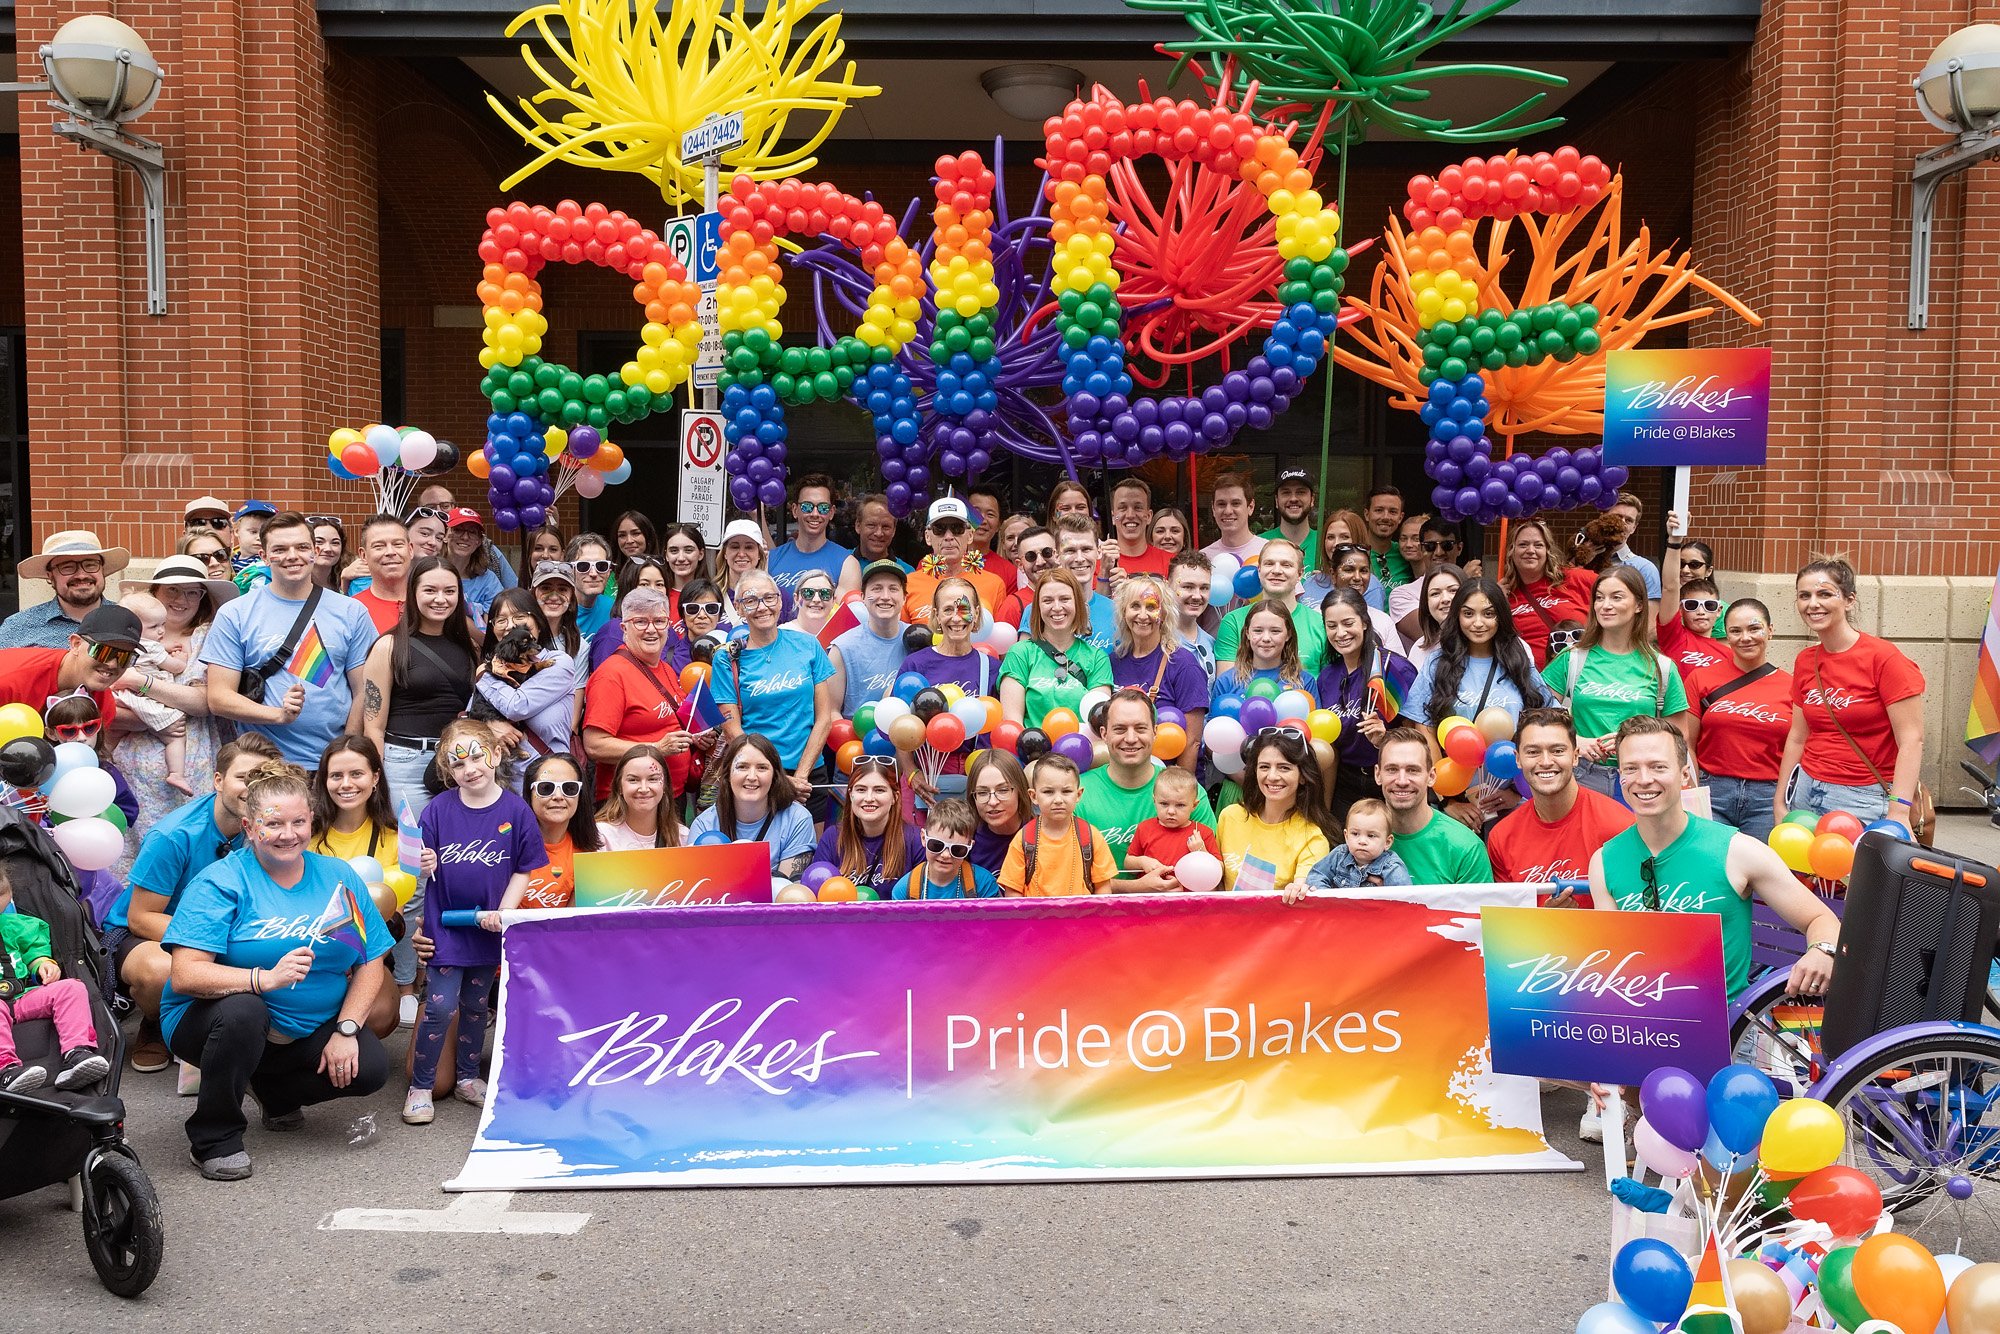 Blakes pride members gathered for a group shot with colourful balloons for the pride parade in Calgary.